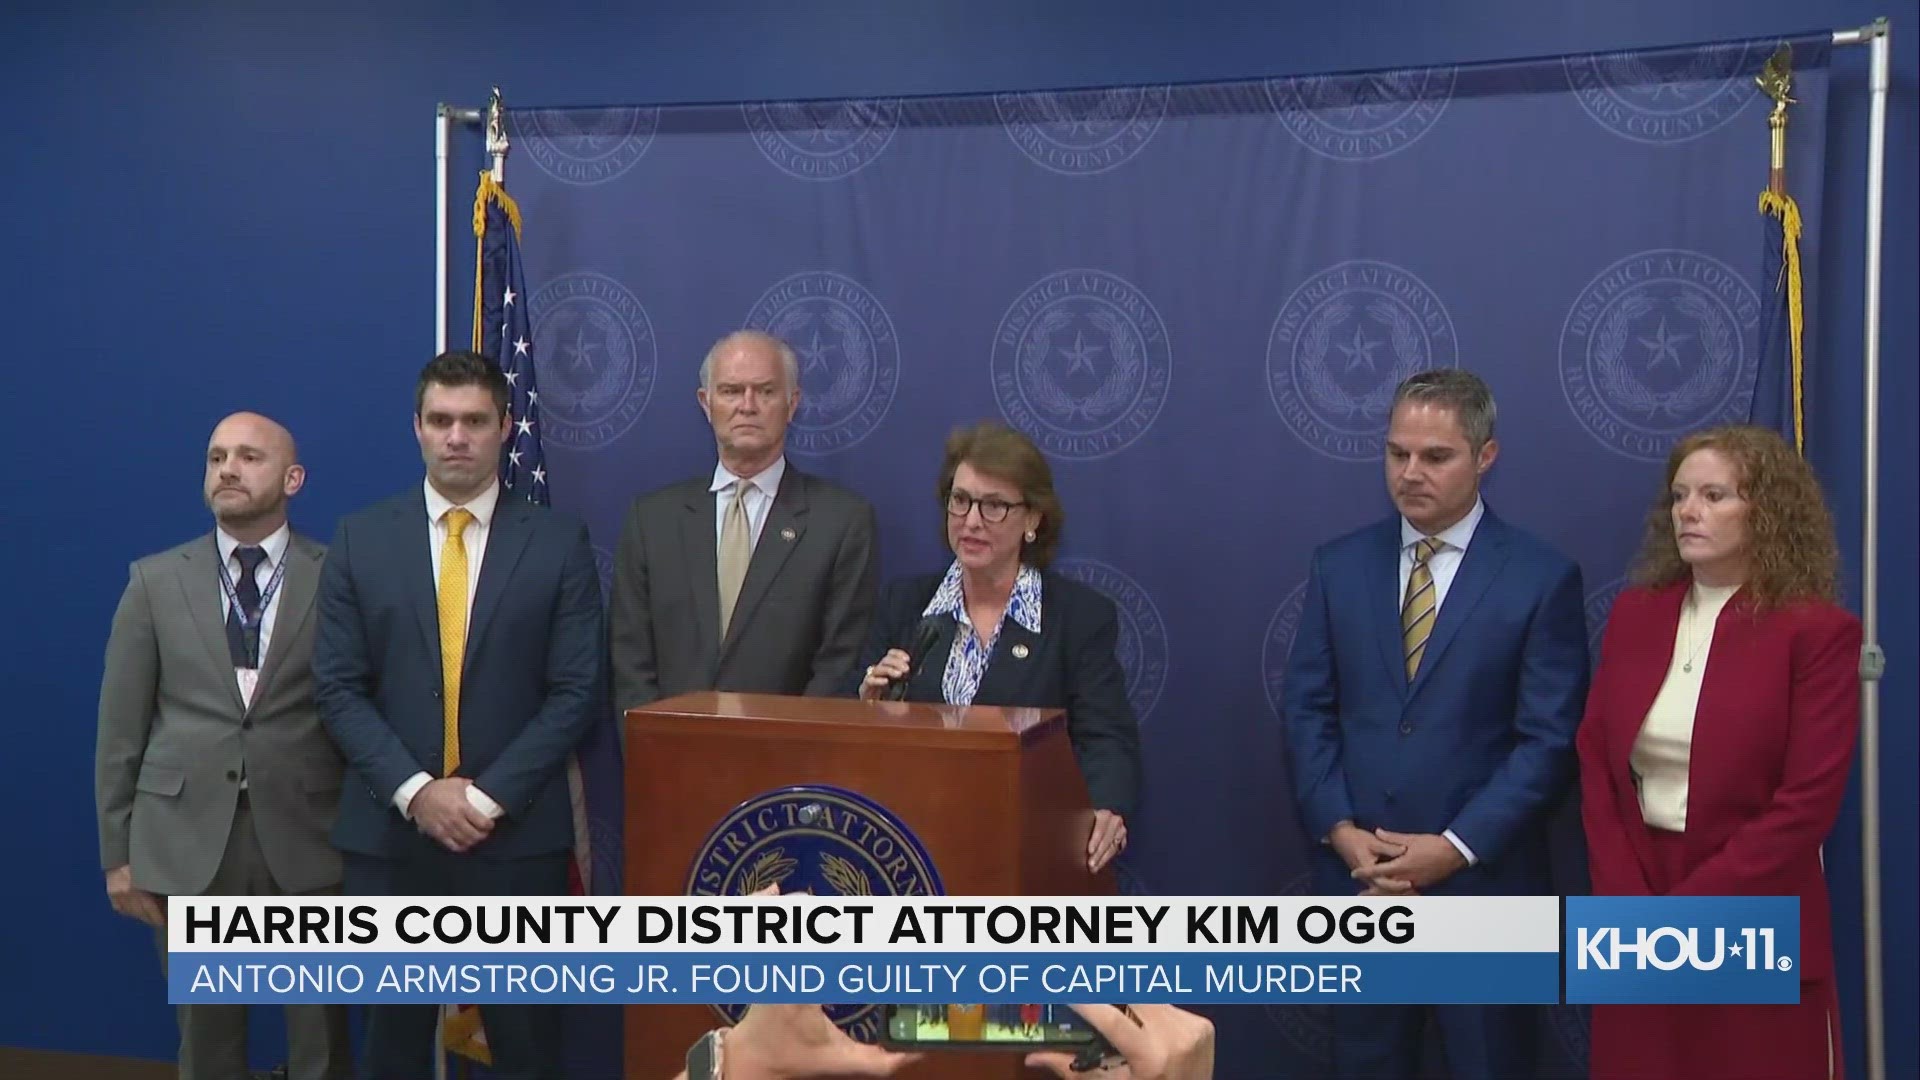 &quot;In trying to speak for those who no longer had a voice to defend themselves or say what happened, our job was to find justice for them,&quot; DA Kim Ogg said.